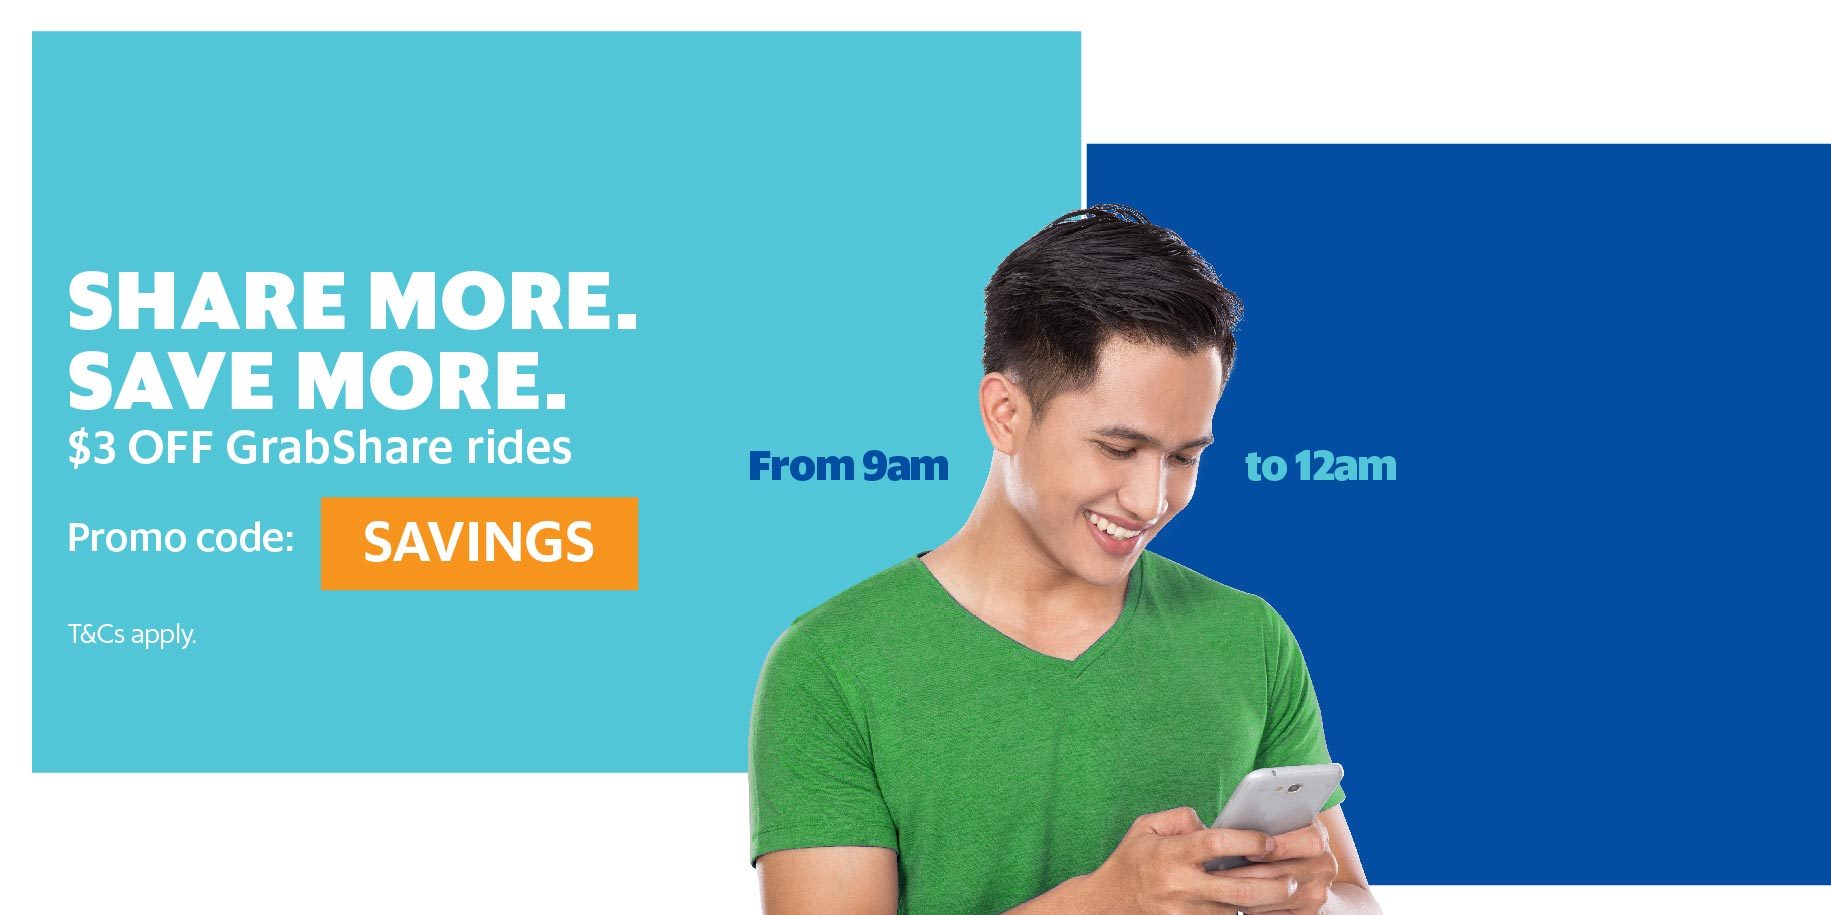 Grab Singapore $3 Off GrabShare Rides Promotion 22-28 Apr 2017